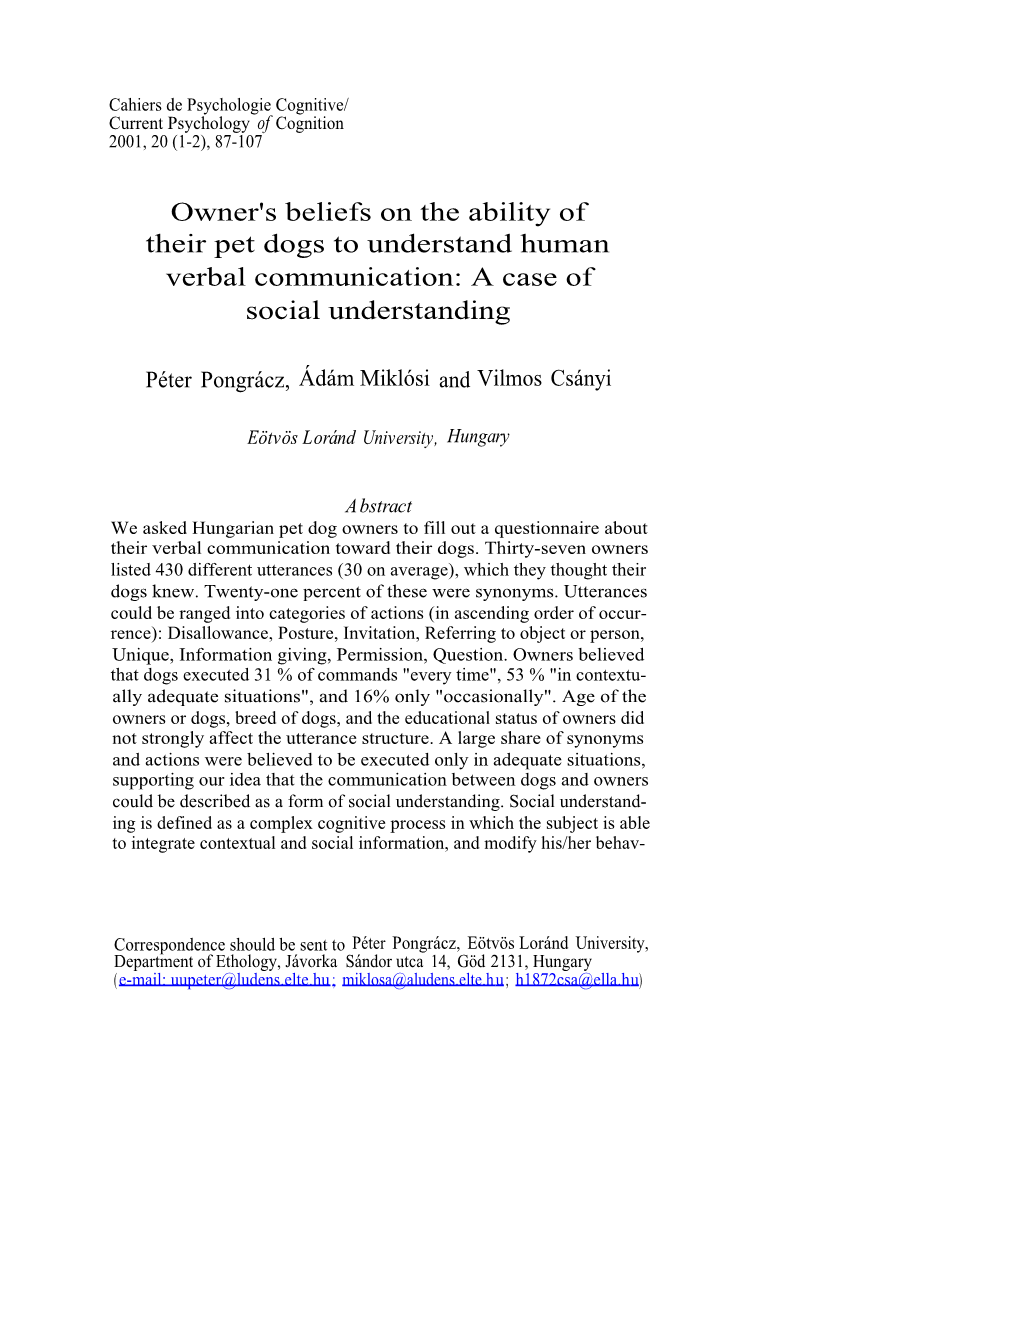 Owner's Beliefs on the Ability of Their Pet Dogs to Understand Human Verbal Communication: a Case of Social Understanding